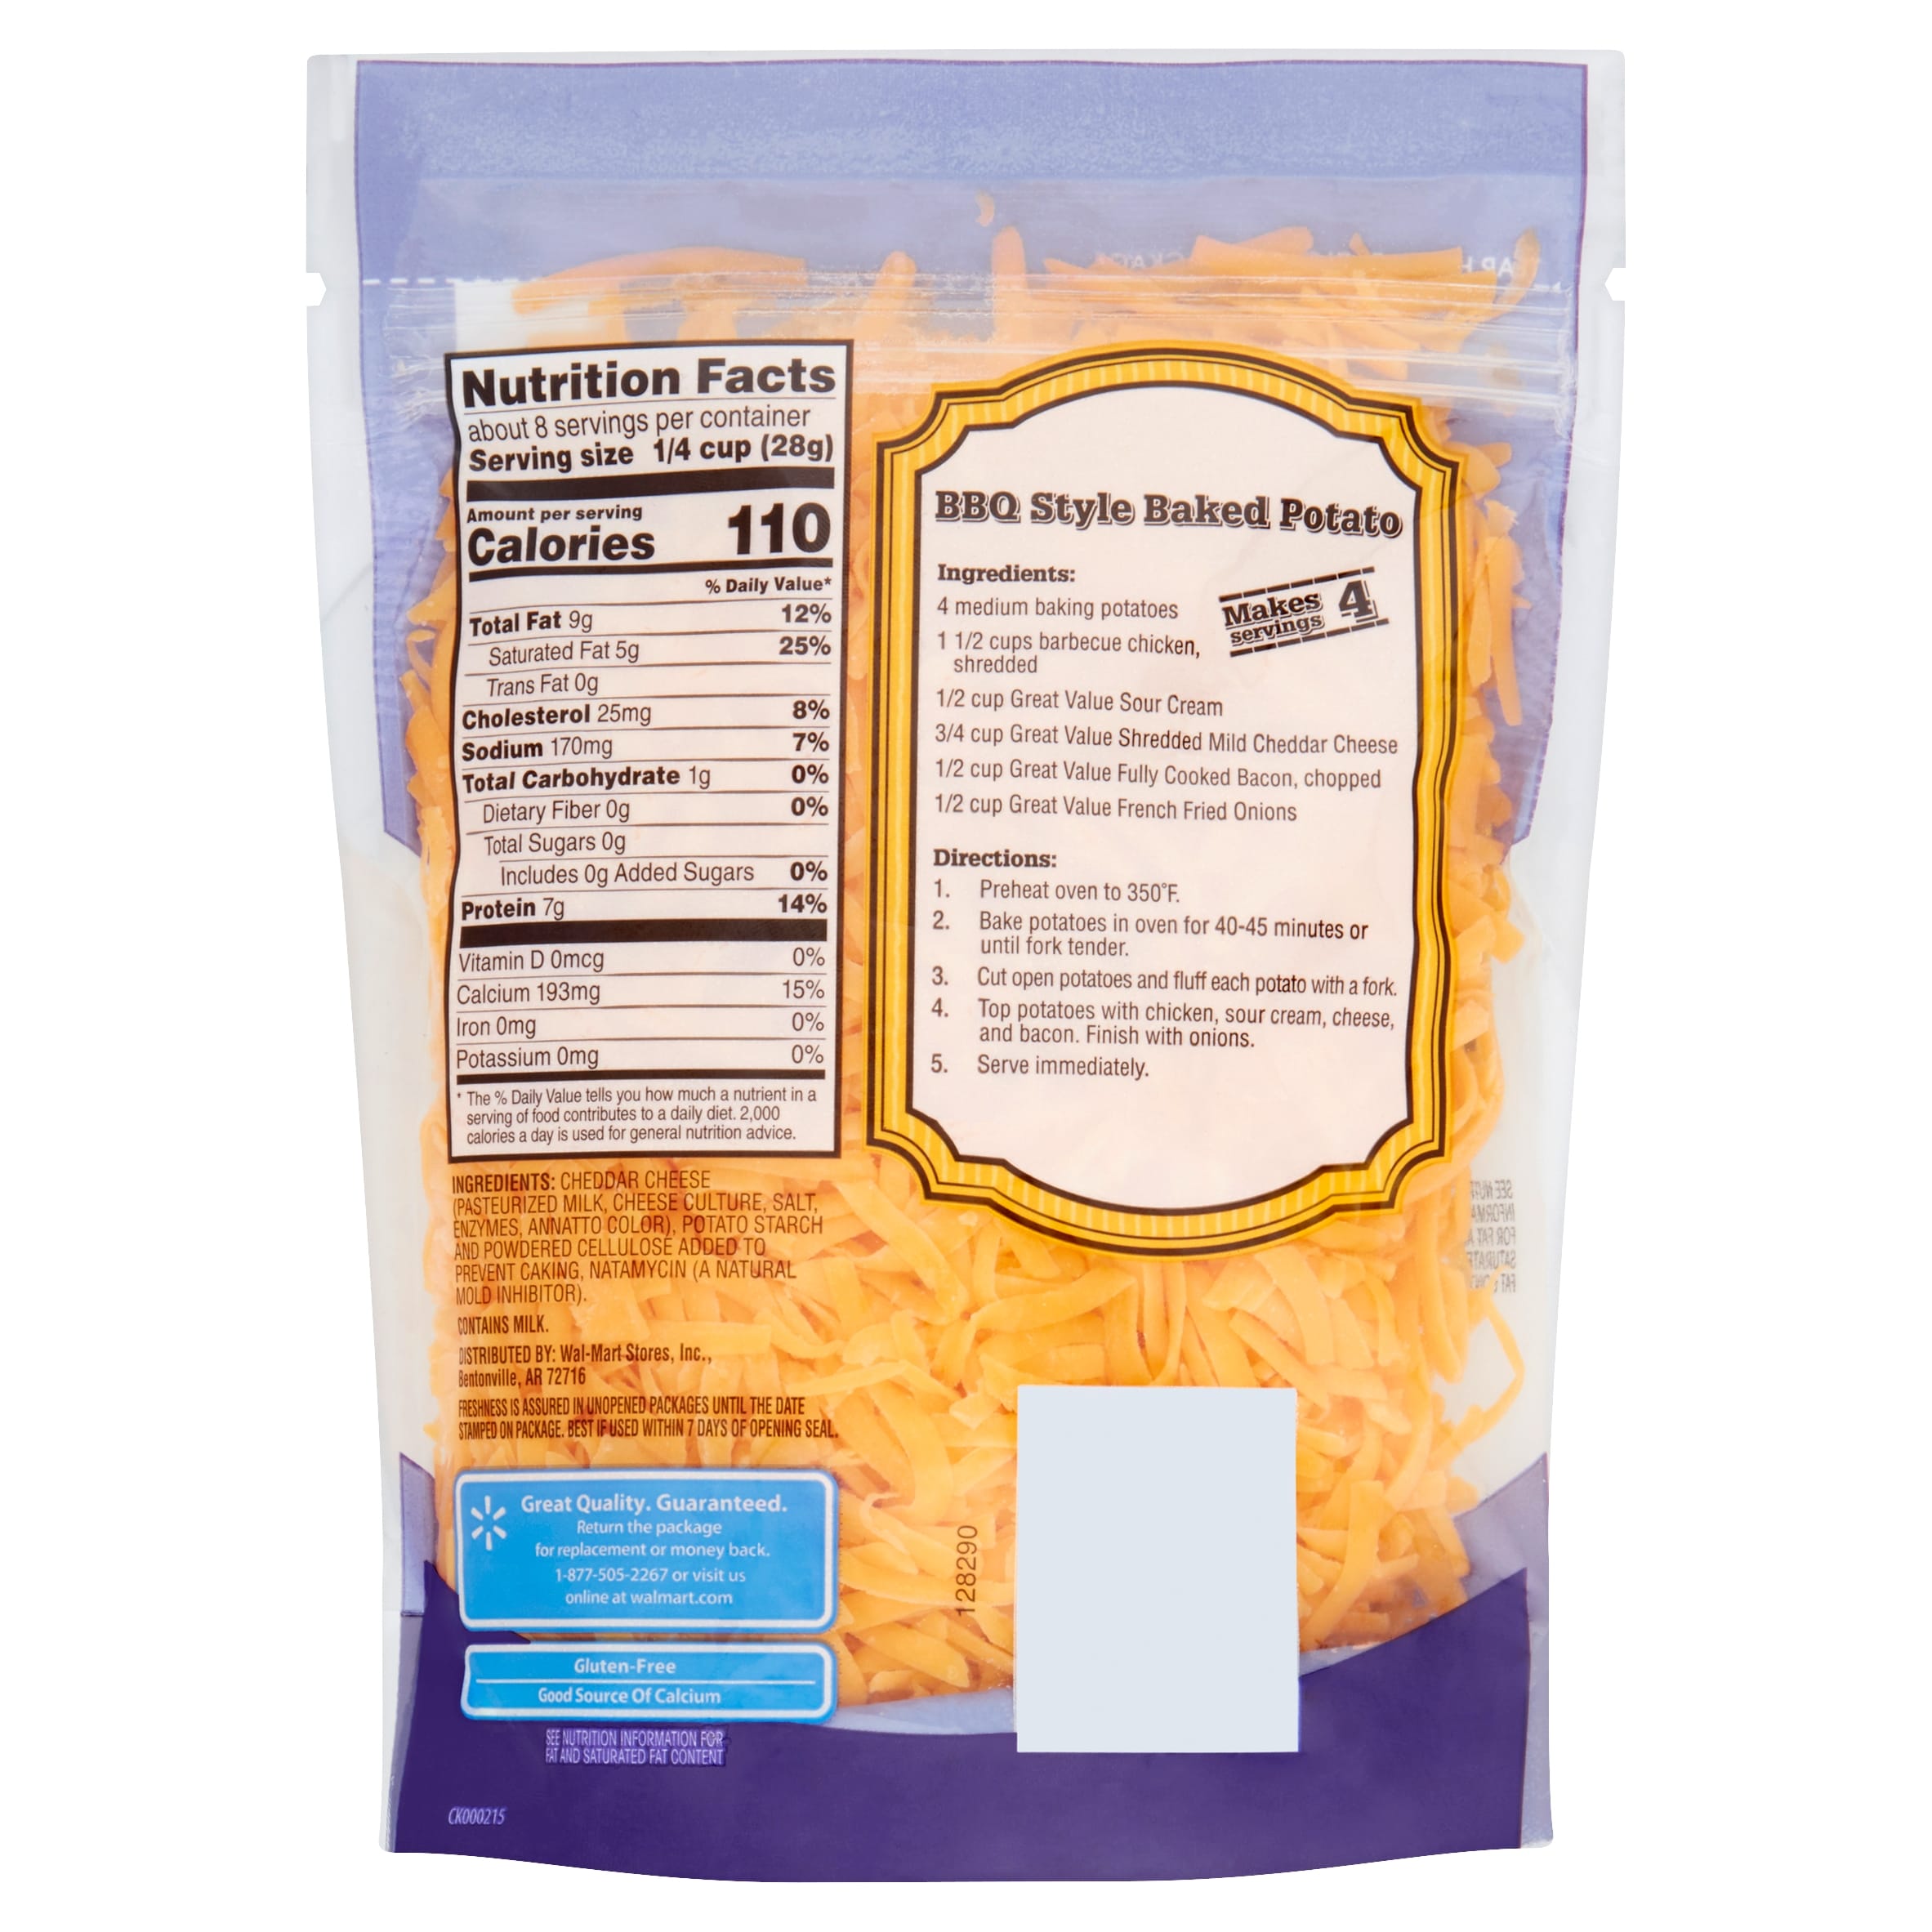 Cheddar Cheese Nutritional Label